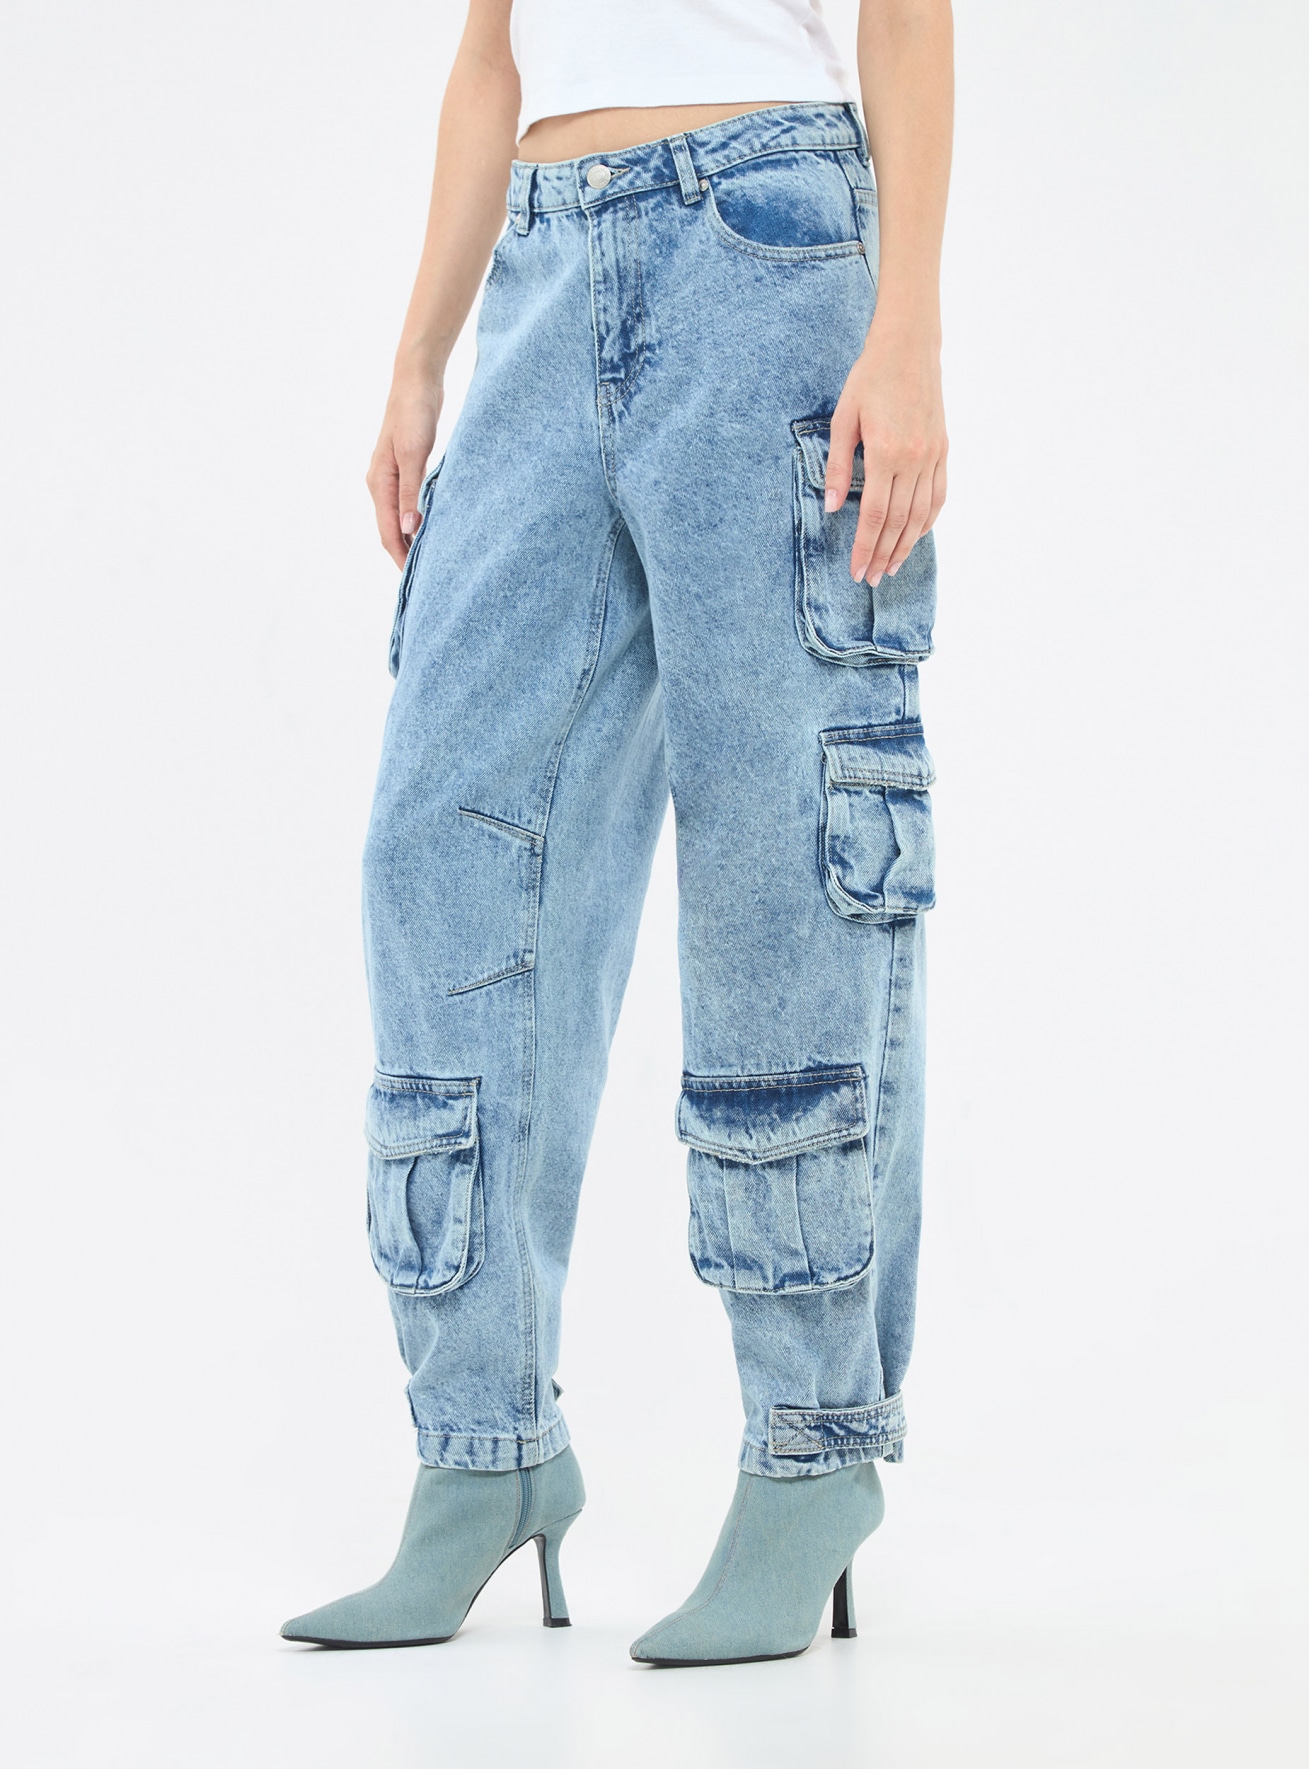 YWDJ Cargo Pants Women Baggy Y2k With Pockets Denim Casual Summer Long Pant  Mid-waist Overalls Pants In Spring And A Popular Choice for Everyday Wear  Going to Work Attending a Casual Event